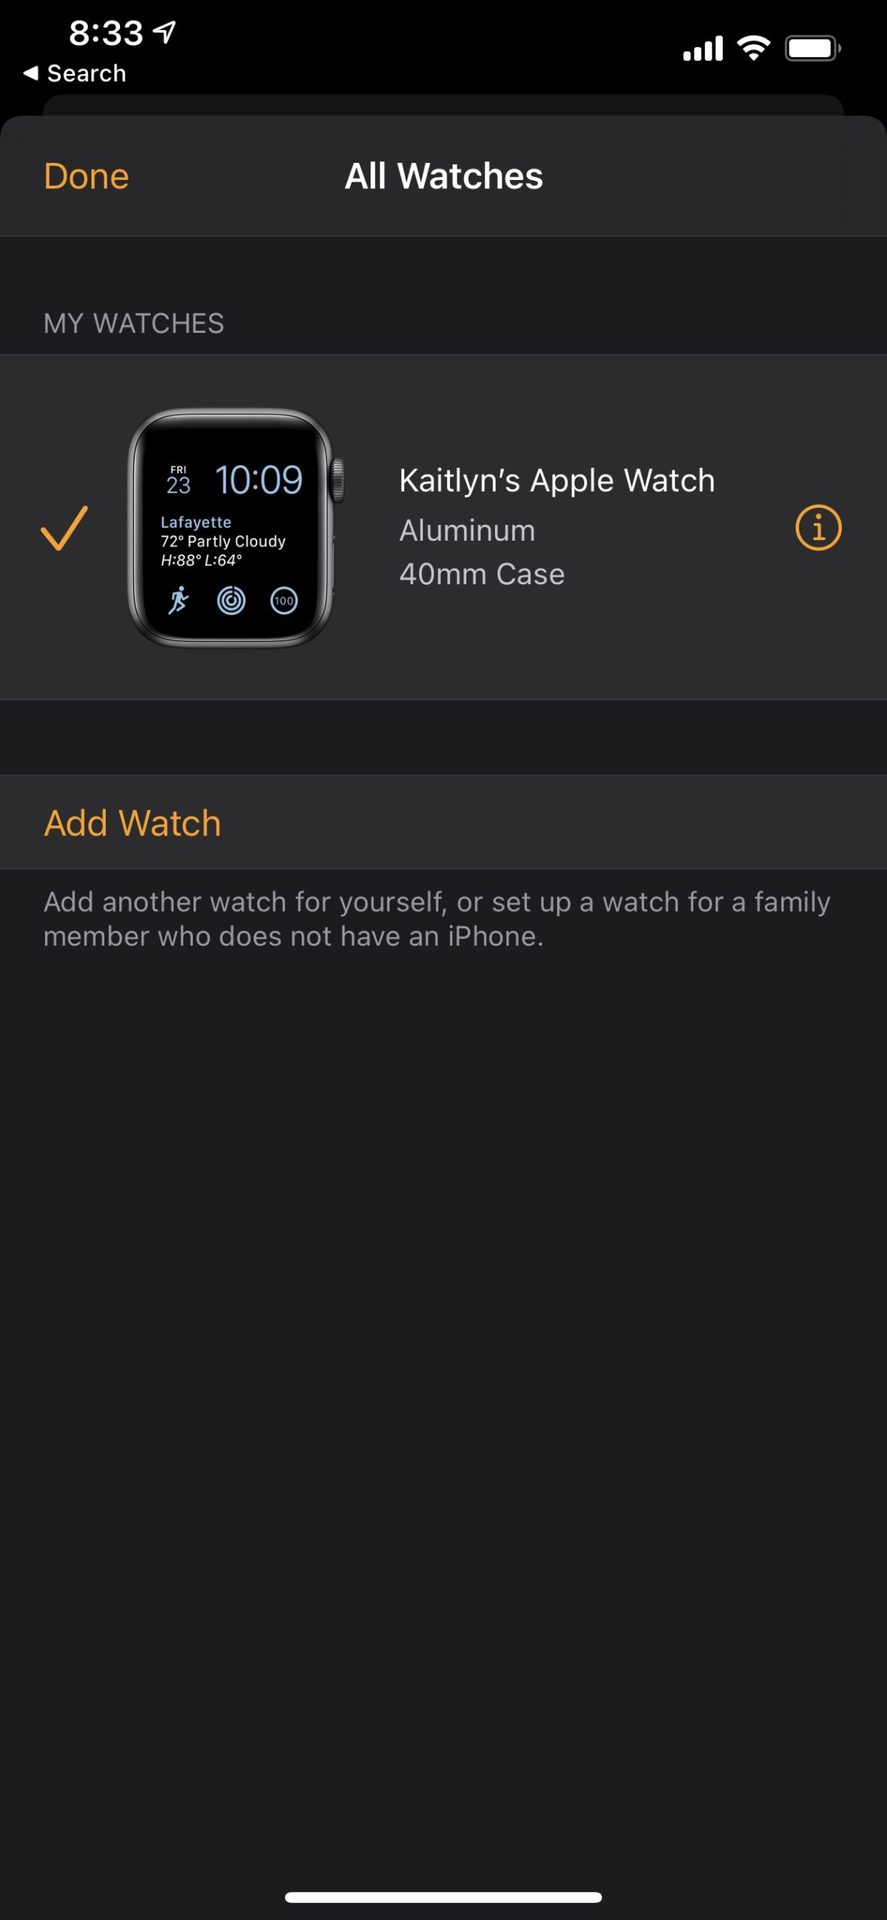 iPhone Watch app screenshot lists all devices currently paired